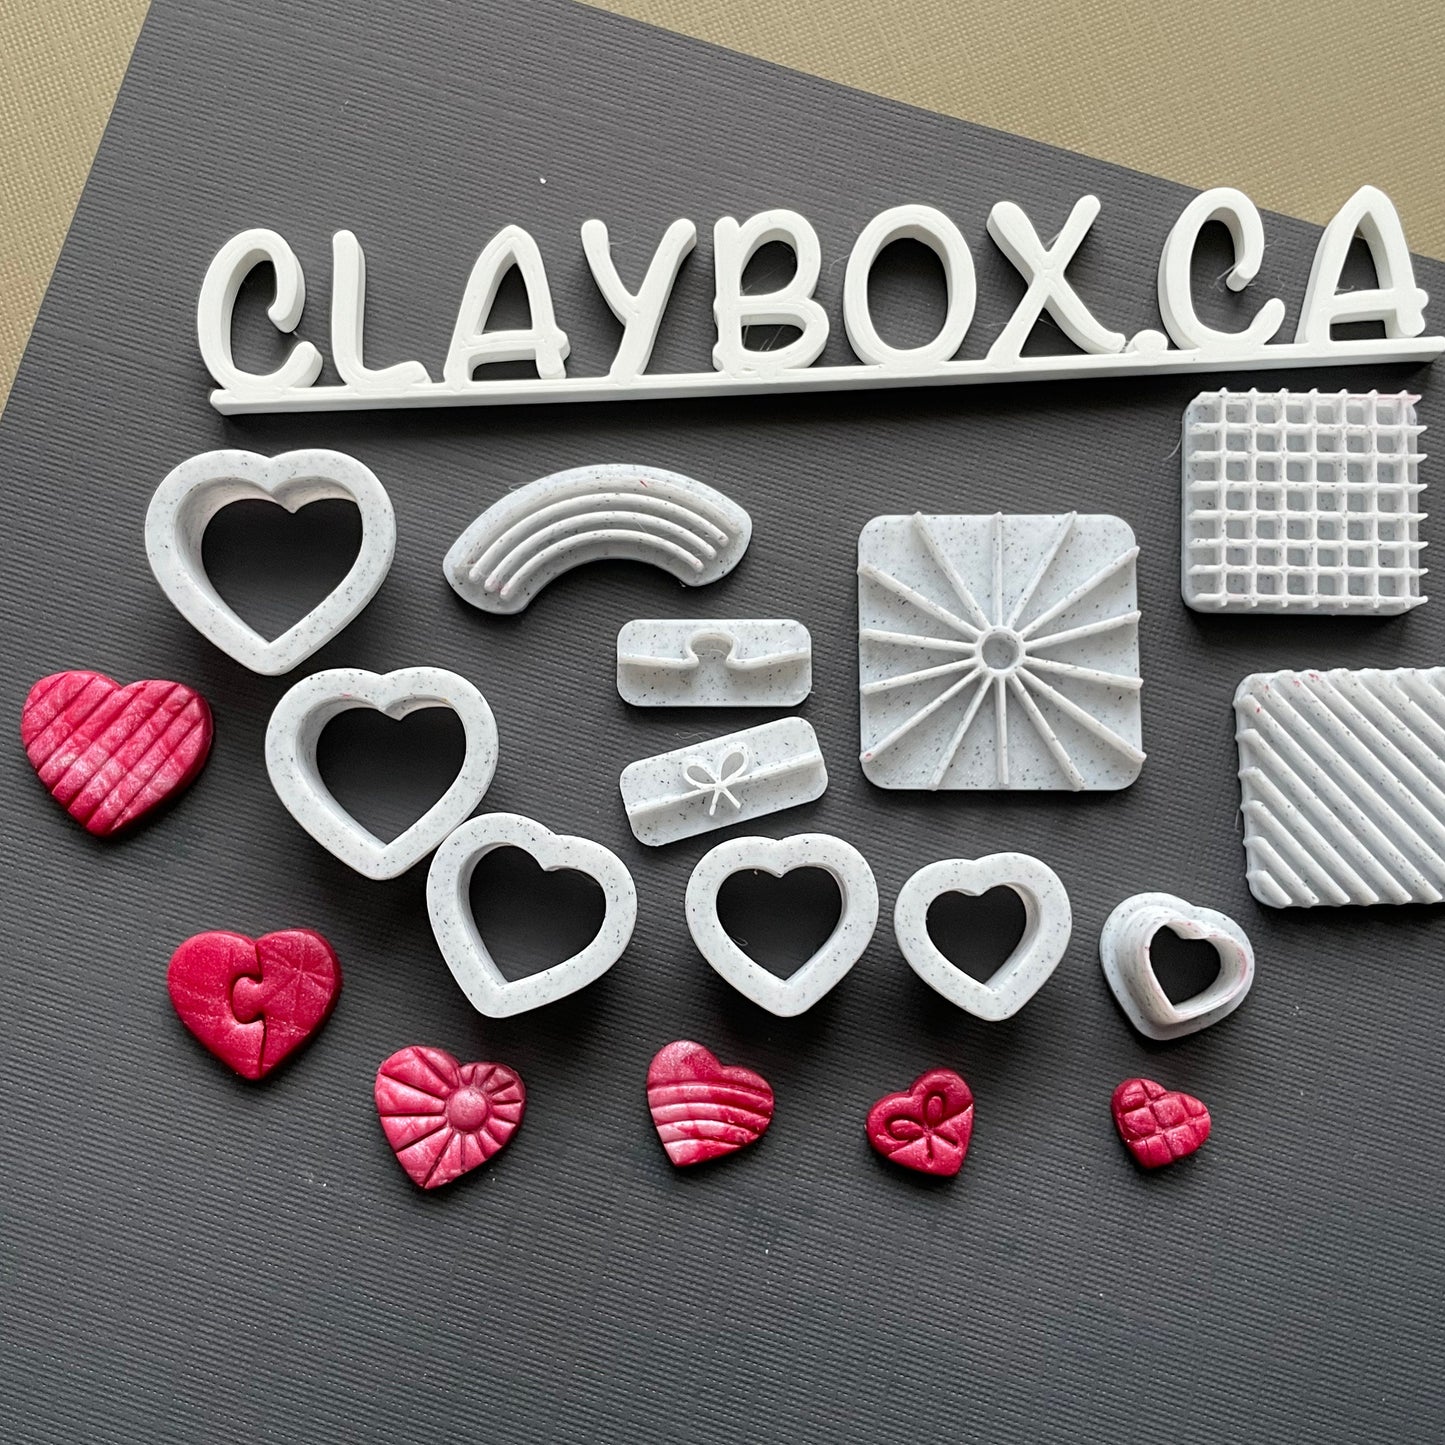 I Heart These stamps and cutters - made for use with polymer clay